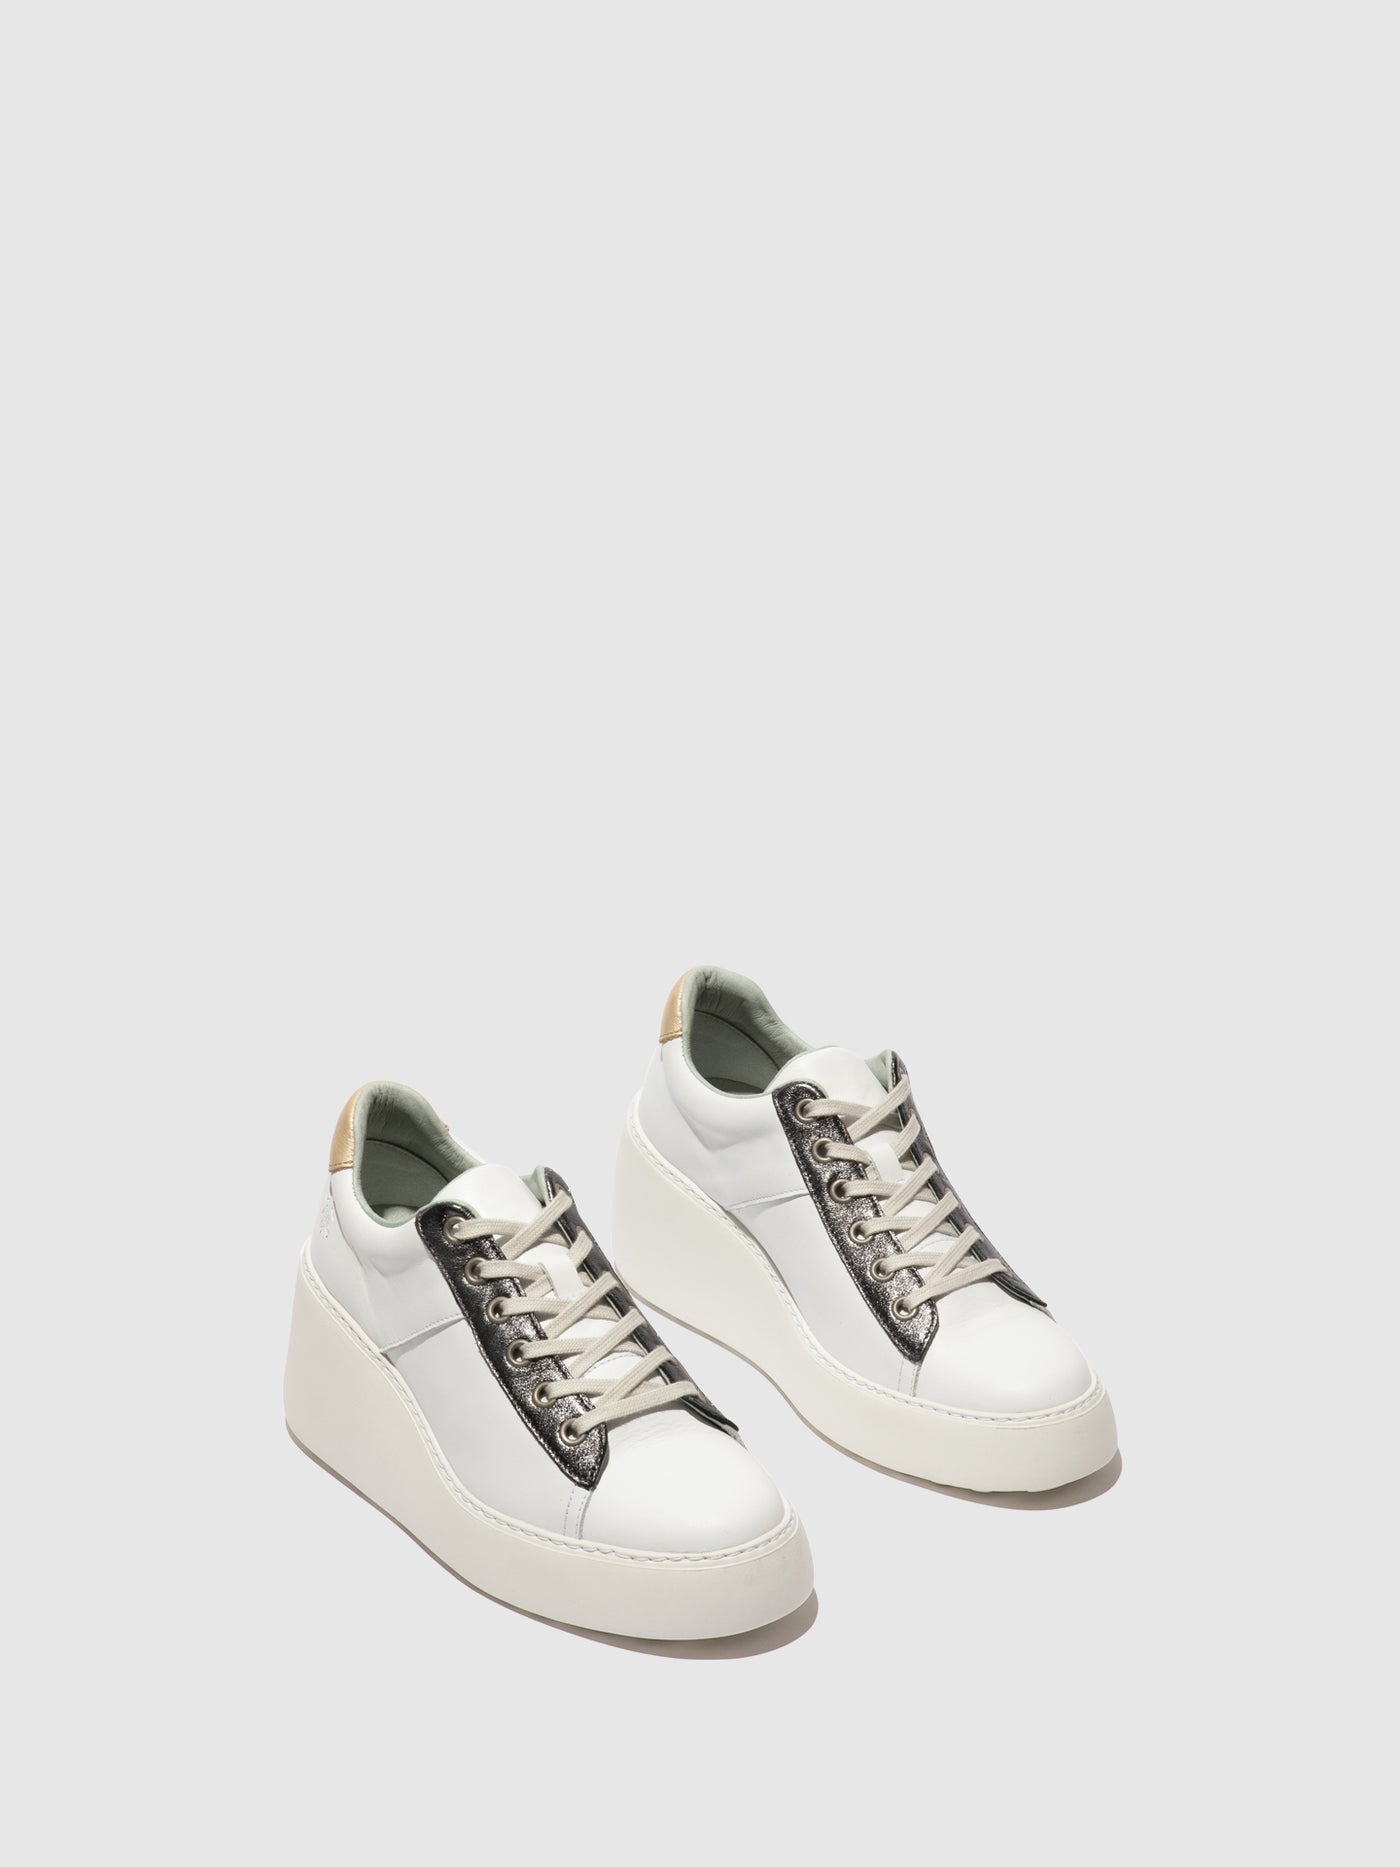 Lace-up Trainers DELF580FLY WHITE/GRAPHITE/MYNT